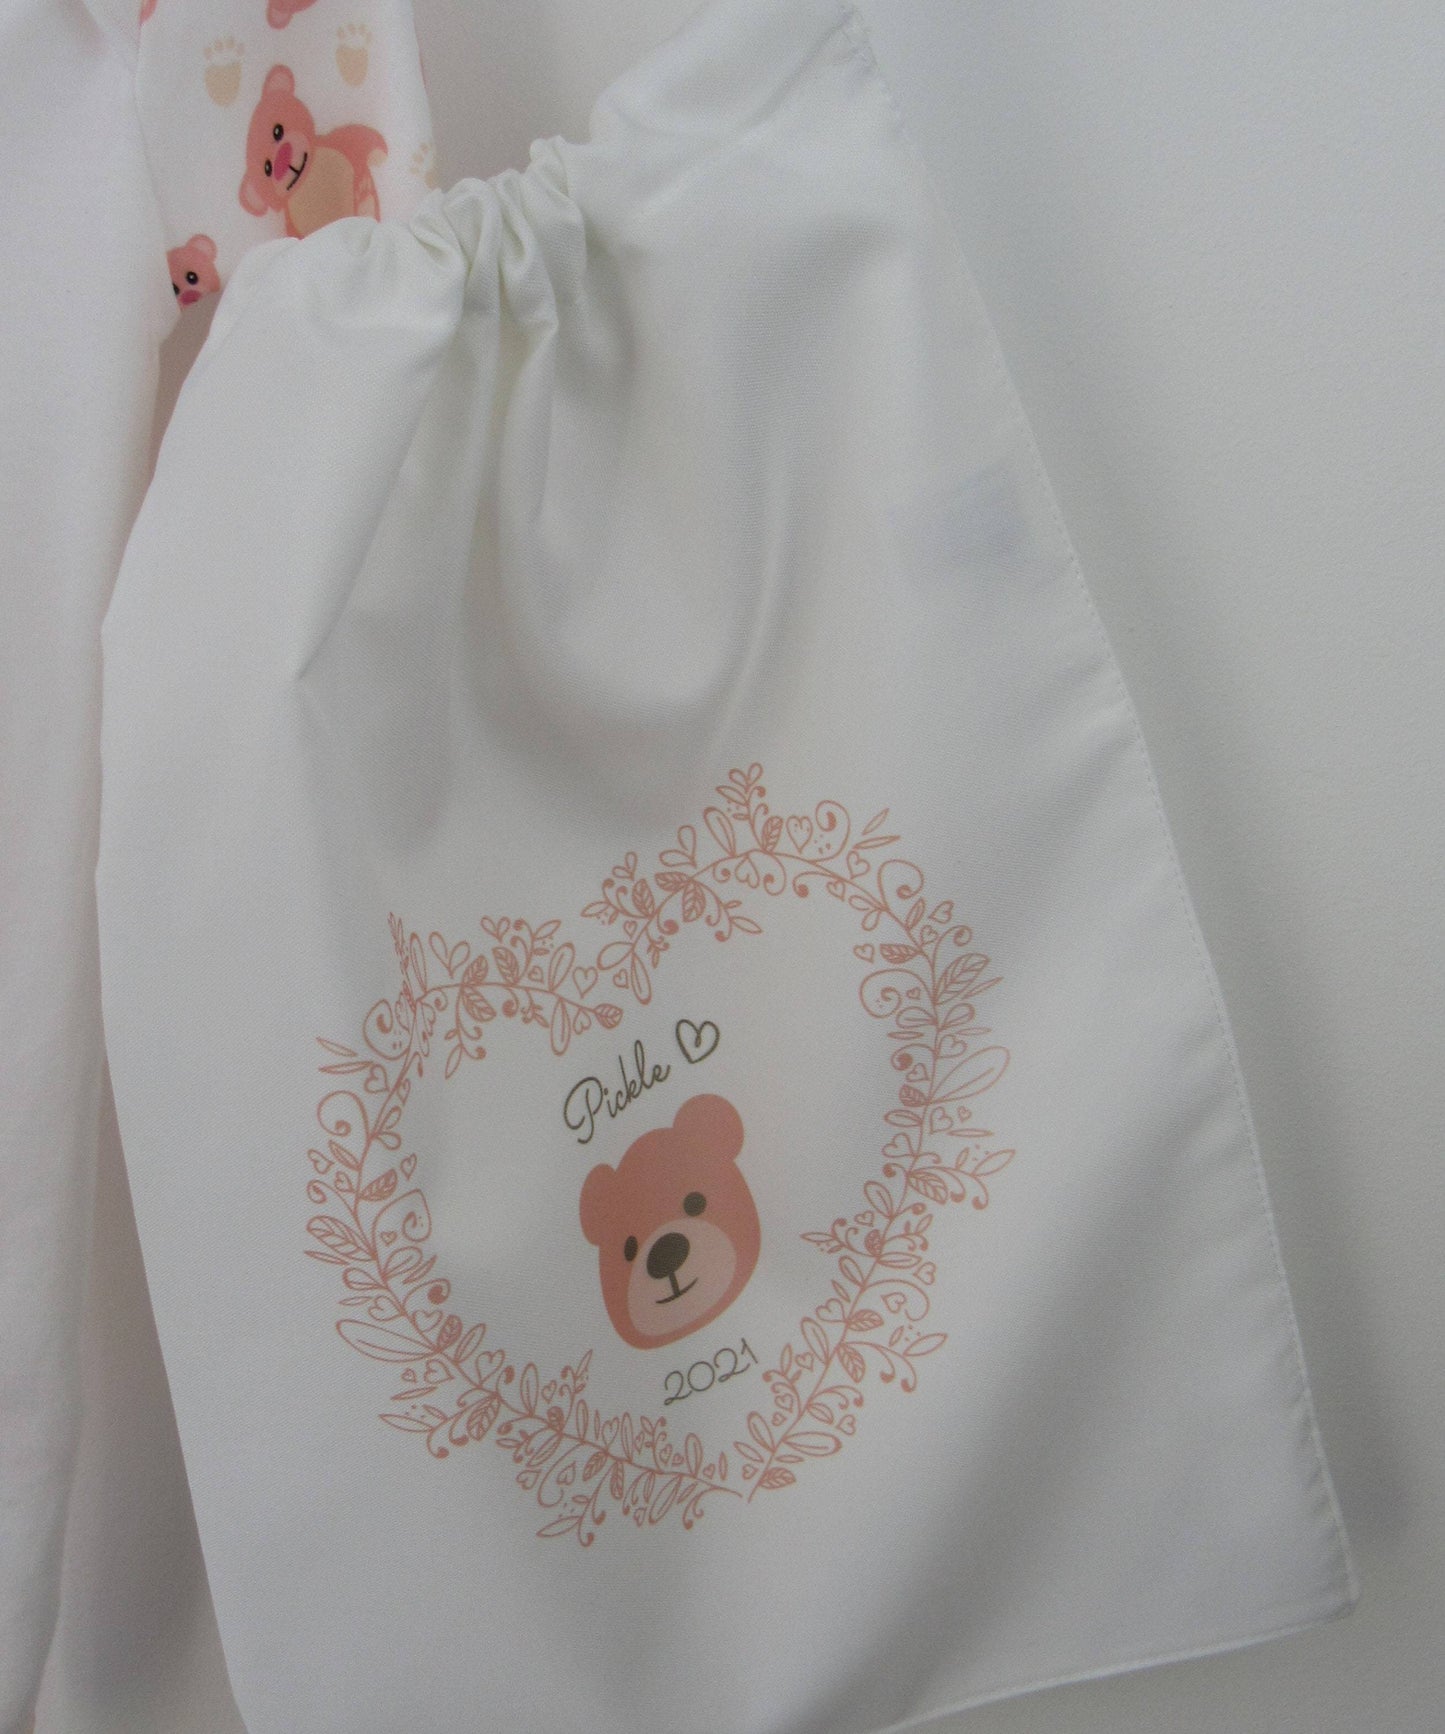 White drawstring bag printed with pink hello bear motif and baby details  By Sweetlea Gifts